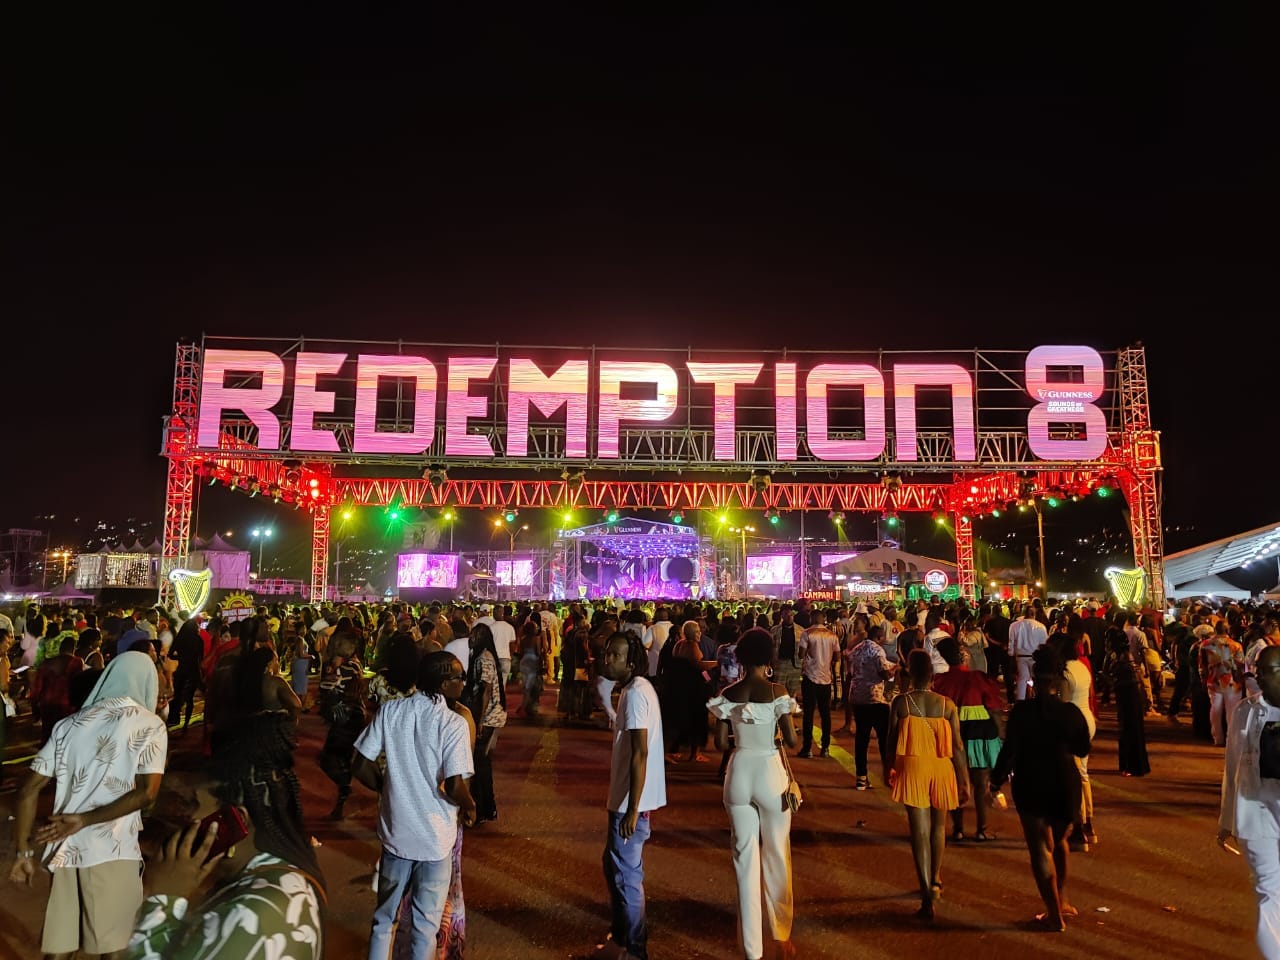 Redemption promoters thank fans for patience amid “issues observed”